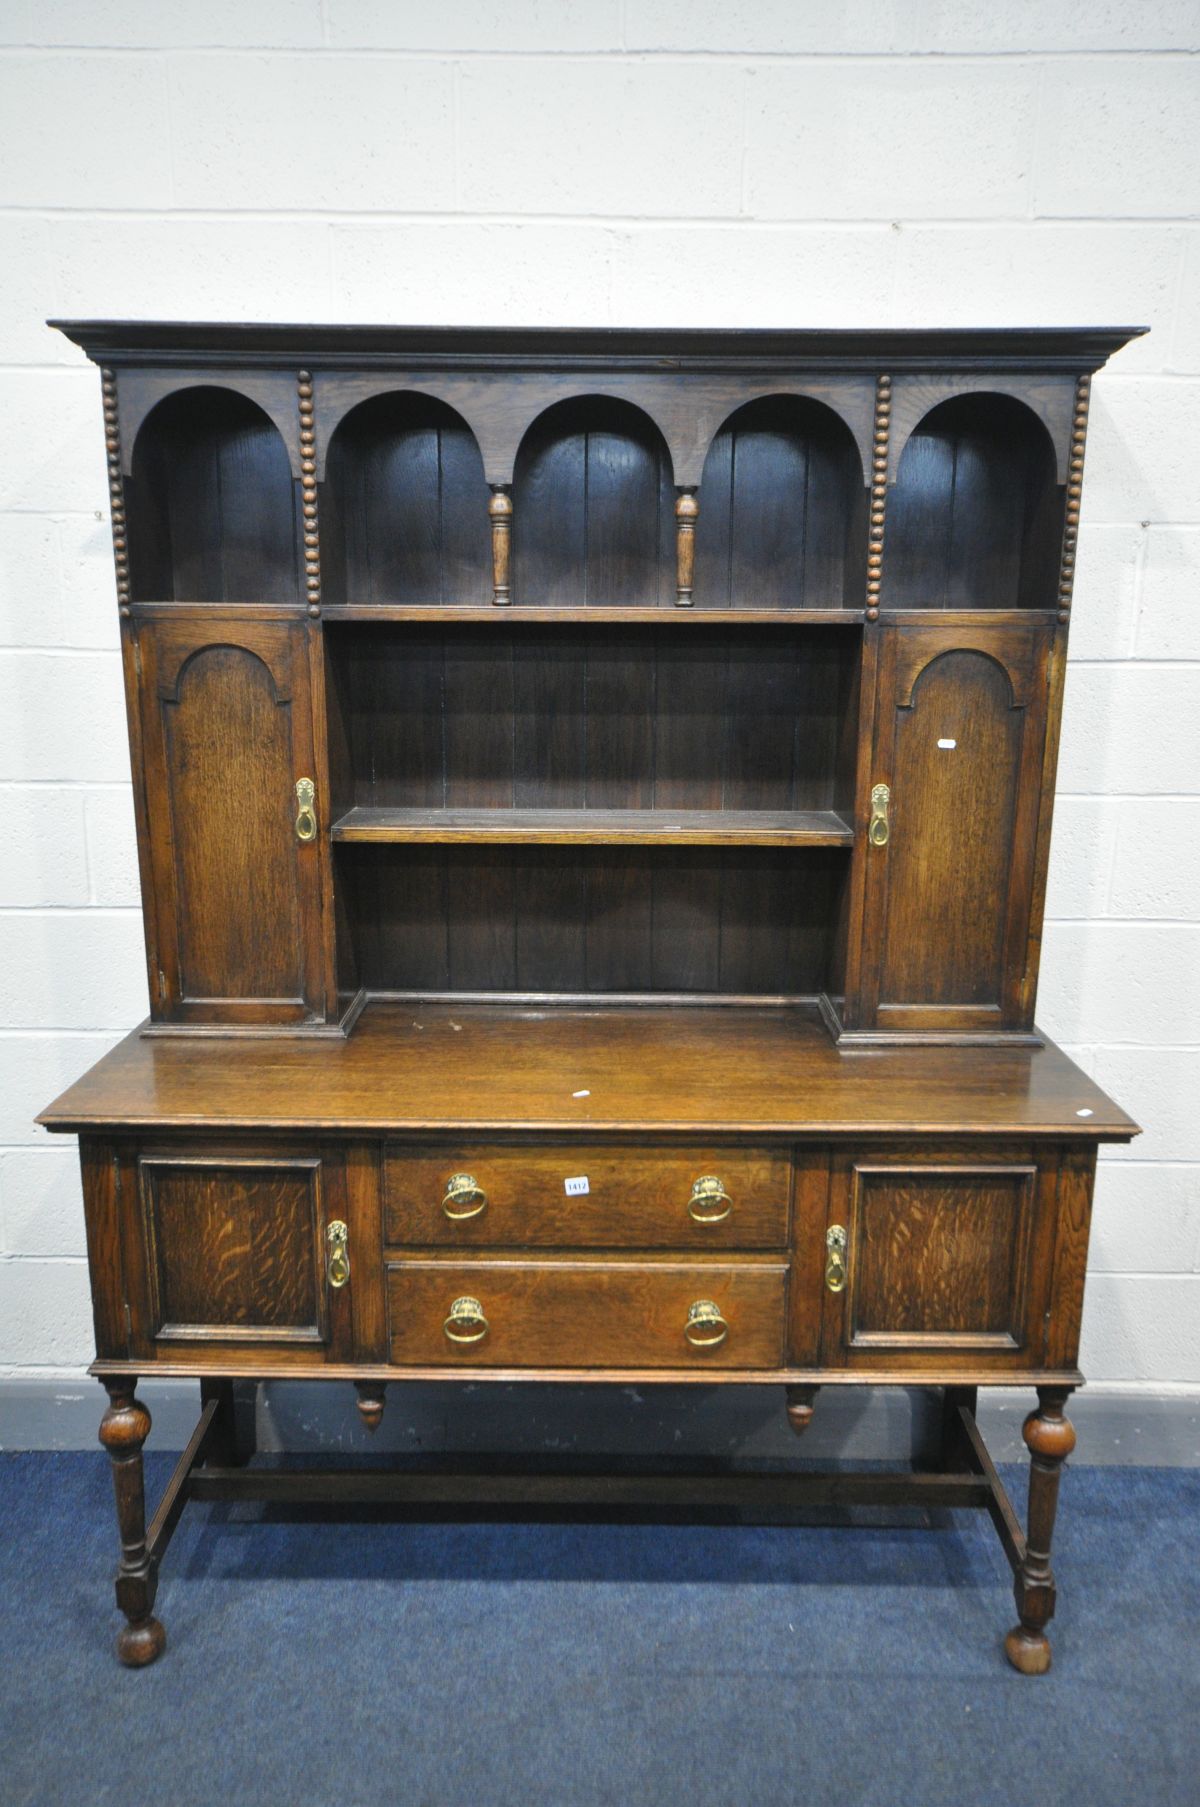 AN EARLY 20TH CENTURY OAK DRESSER, width 153cm x depth 53cm x height 200cm (condition:-losses) - Image 2 of 3